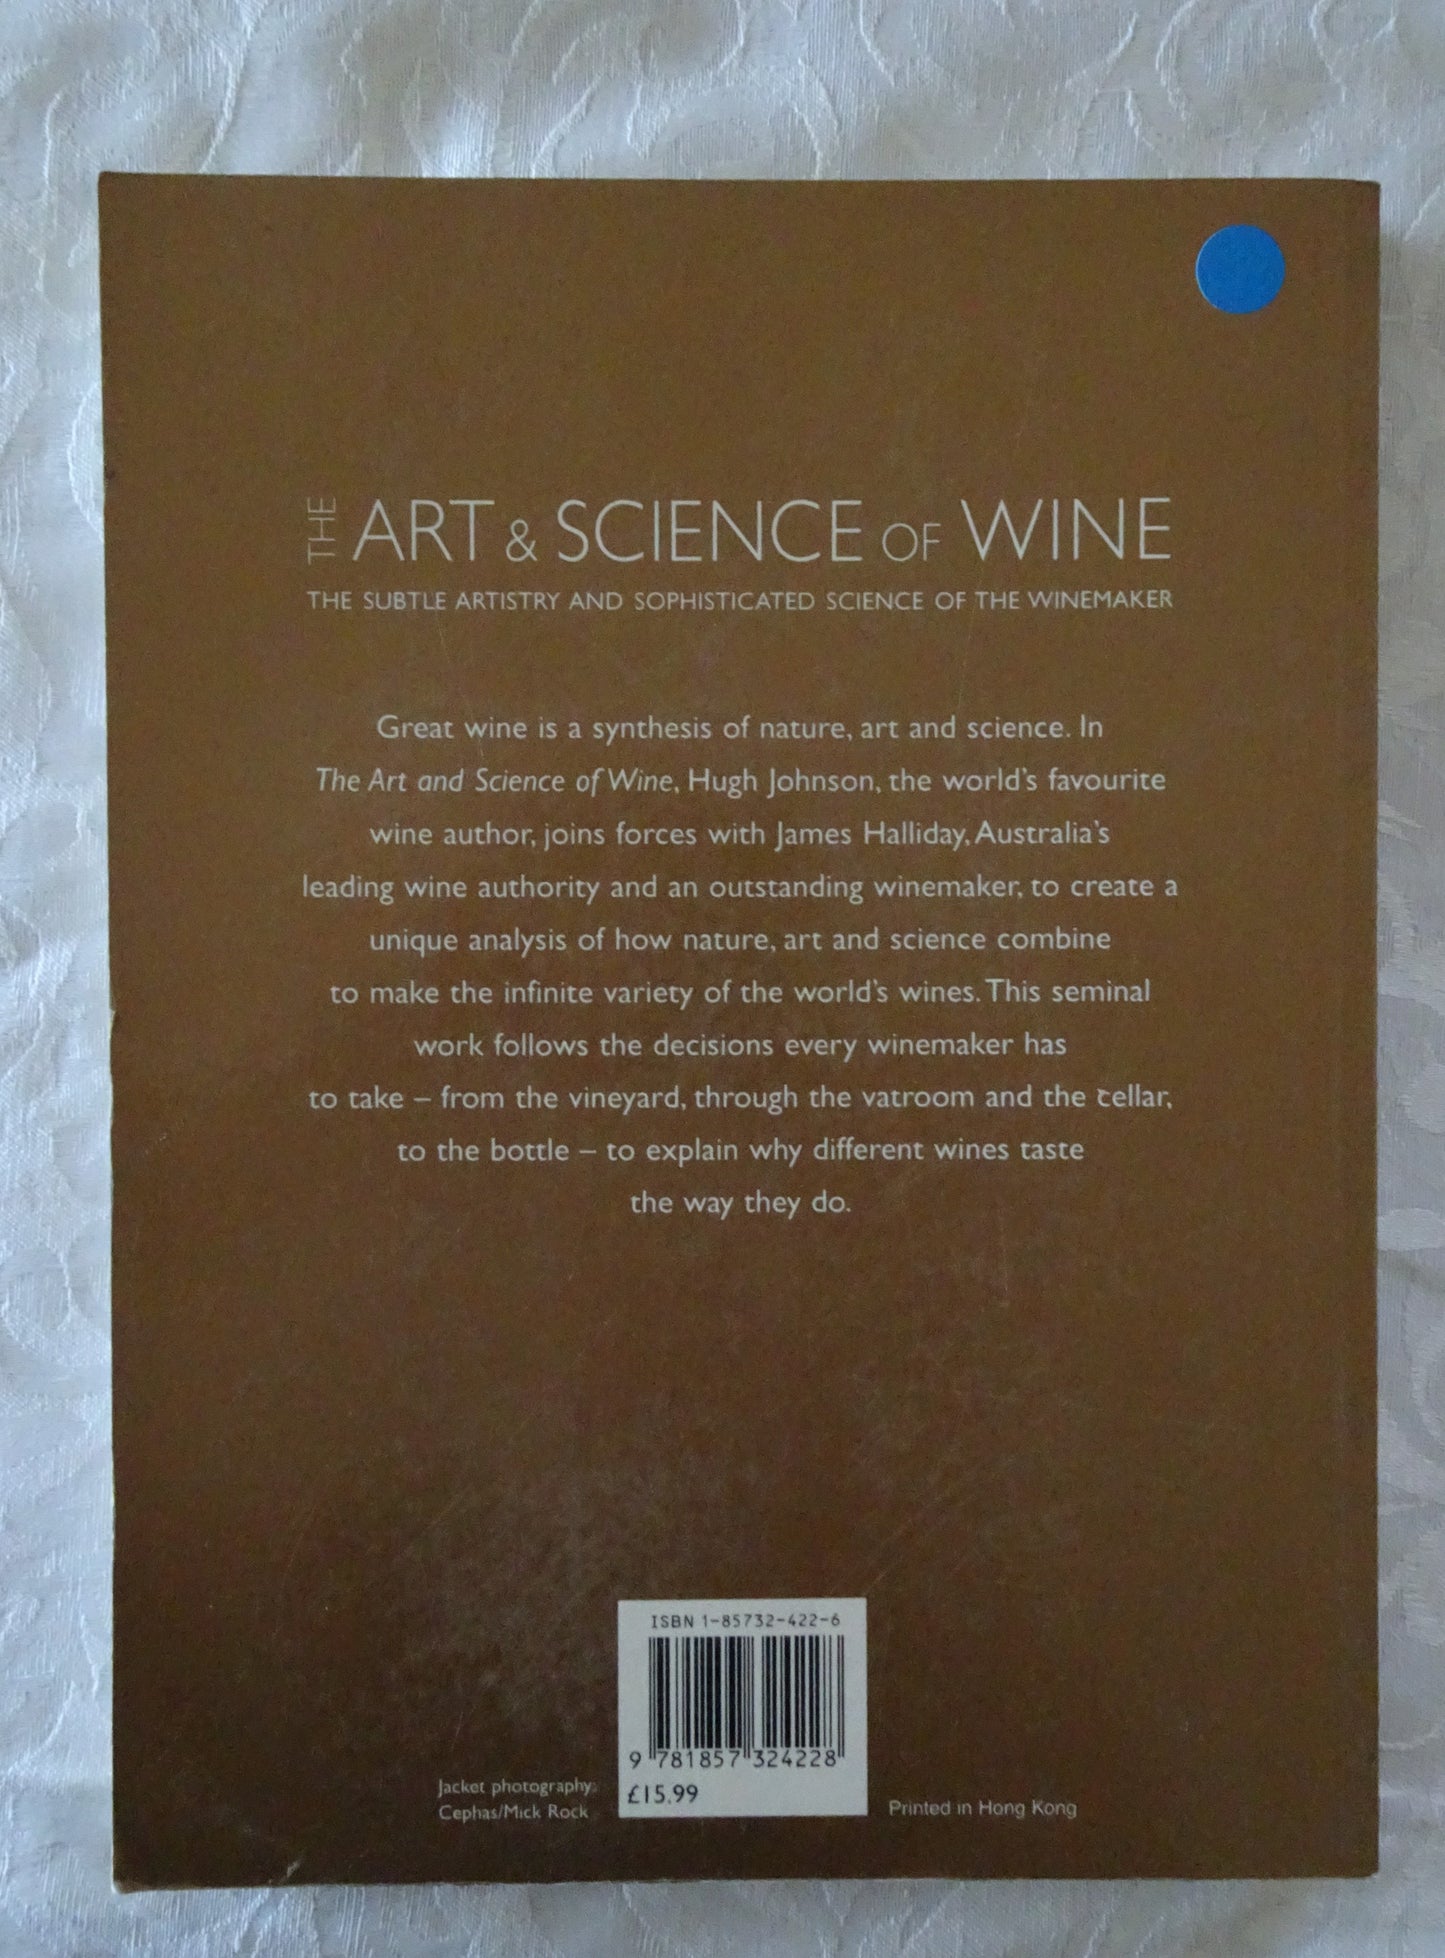 The Art & Science of Wine by James Halliday and Hugh Johnson